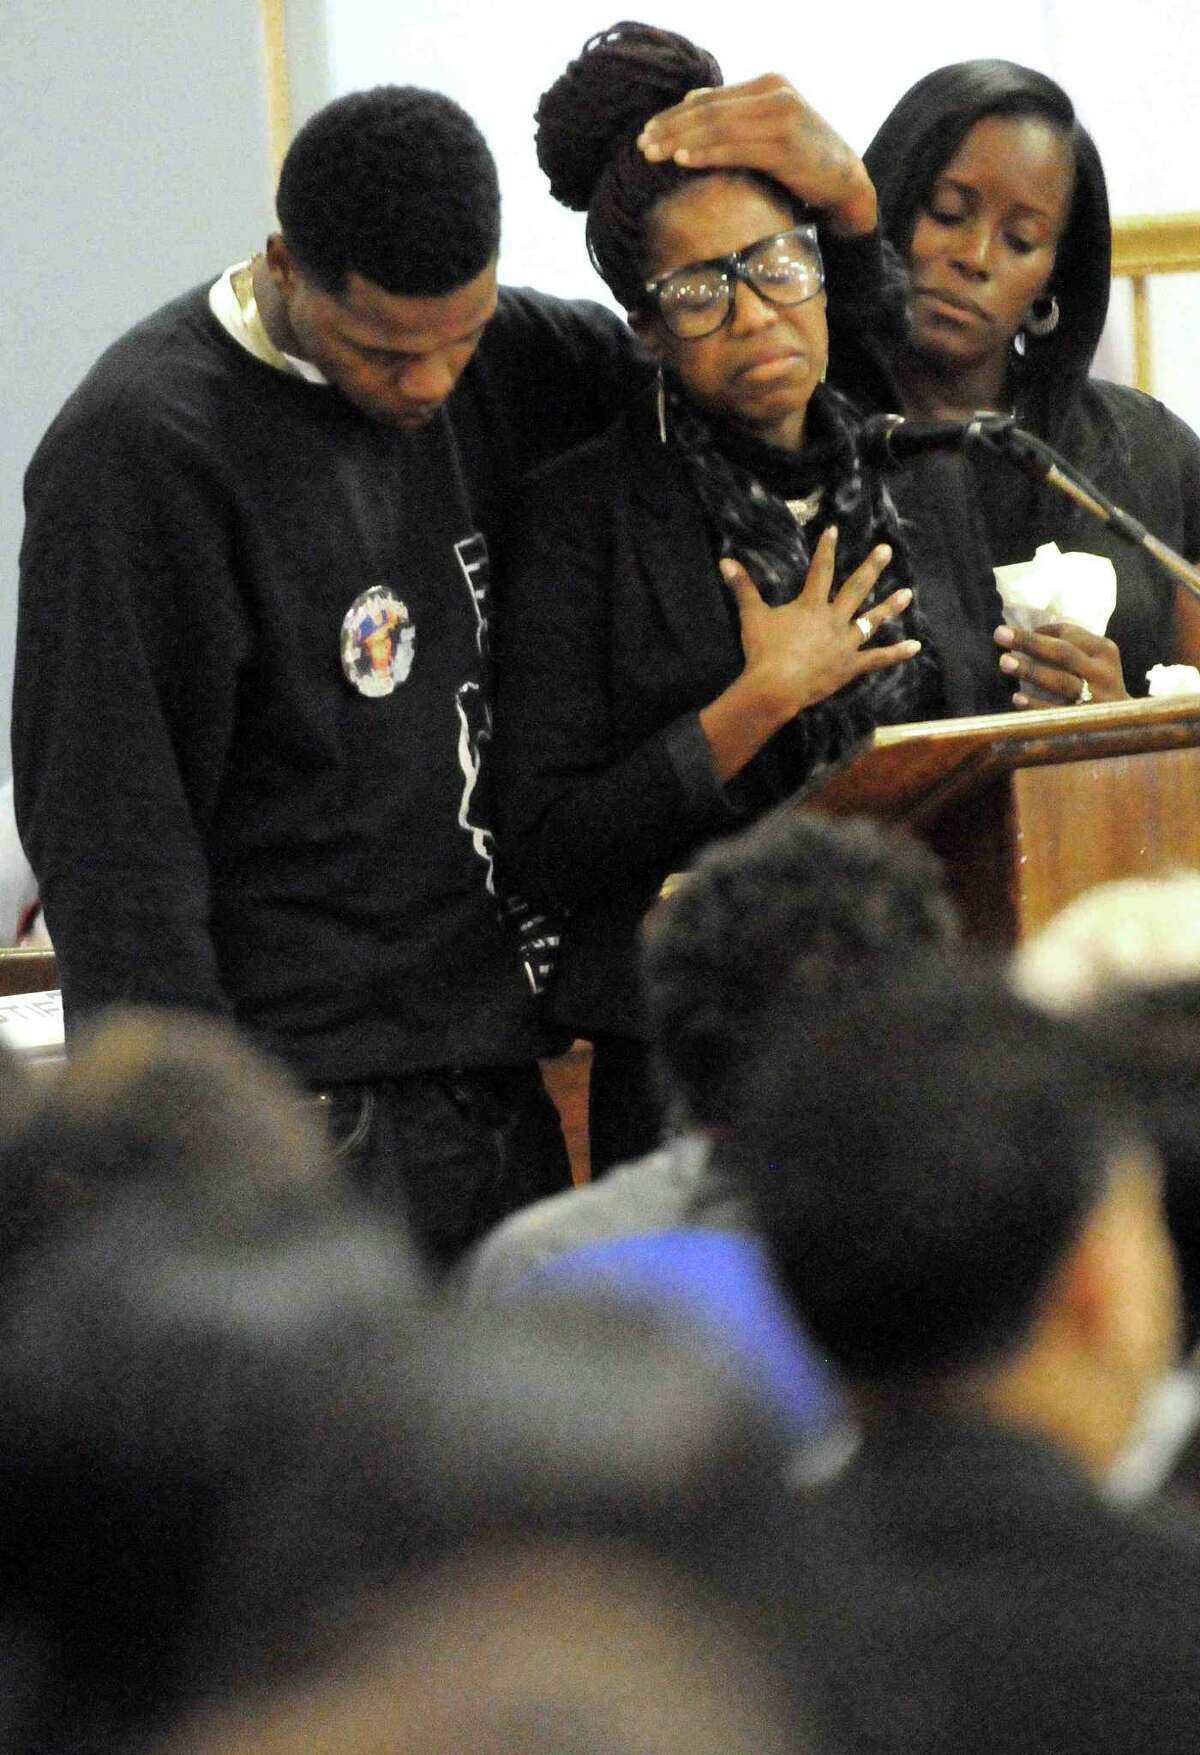 (Peter Hvizdak — Register) Gregory Fulcher, Jr.of West Haven, left, comforts Lakeisha Robinson of East Haven, center, as Robinson speaks at the funeral of her sister Erika Renee Robinson Saturday November 2, 2013 at the Agape Christian Center in New Haven, Conn. Robinson was the unintended victim of a shooting last week at the Key Club in New Haven, Conn.